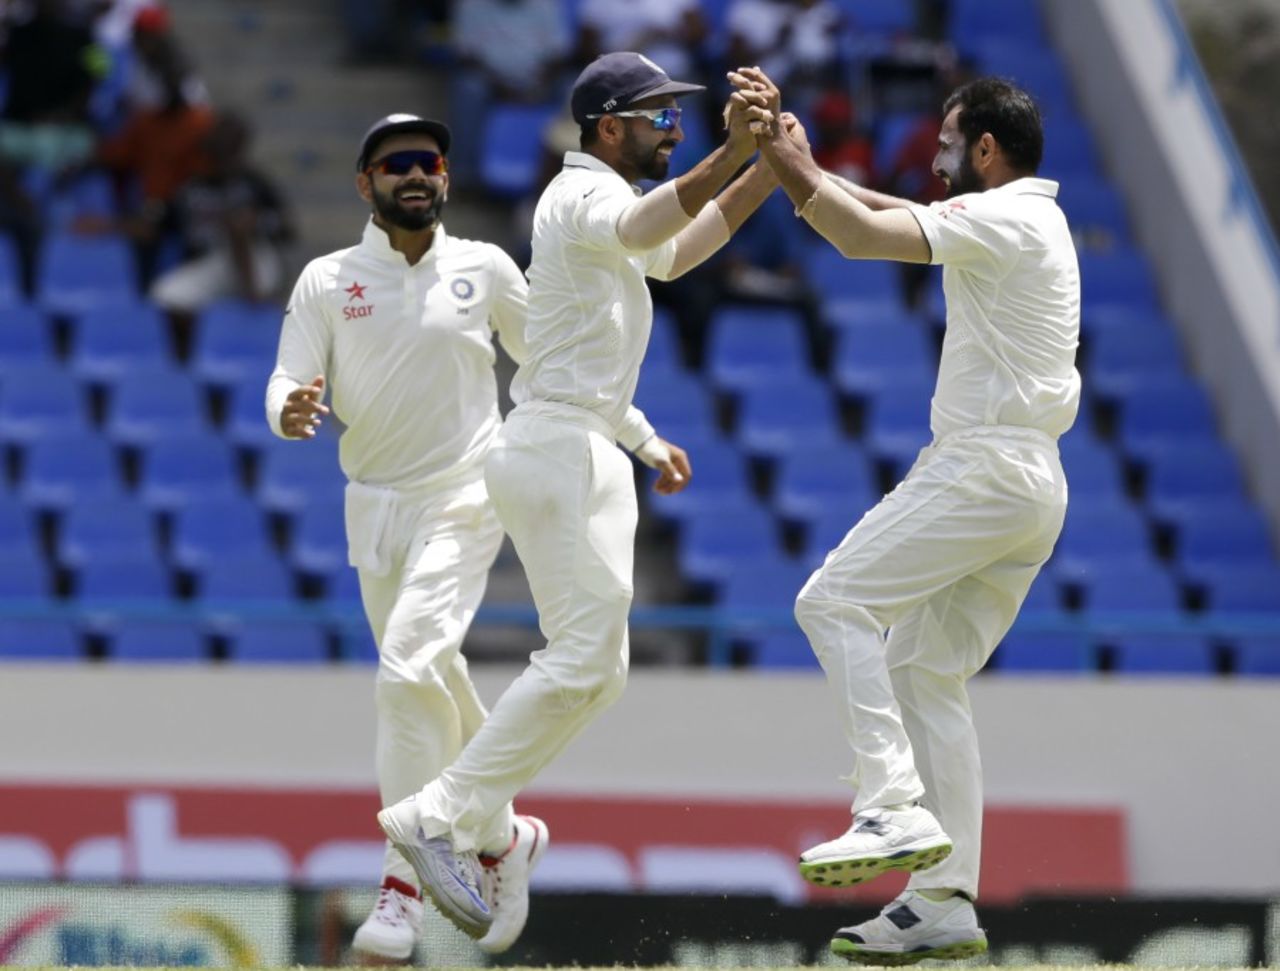 Mohammed Shami celebrates the wicket of Marlon Samuels, West Indies v India, 1st Test, Antigua, 3rd day, July 23, 2016